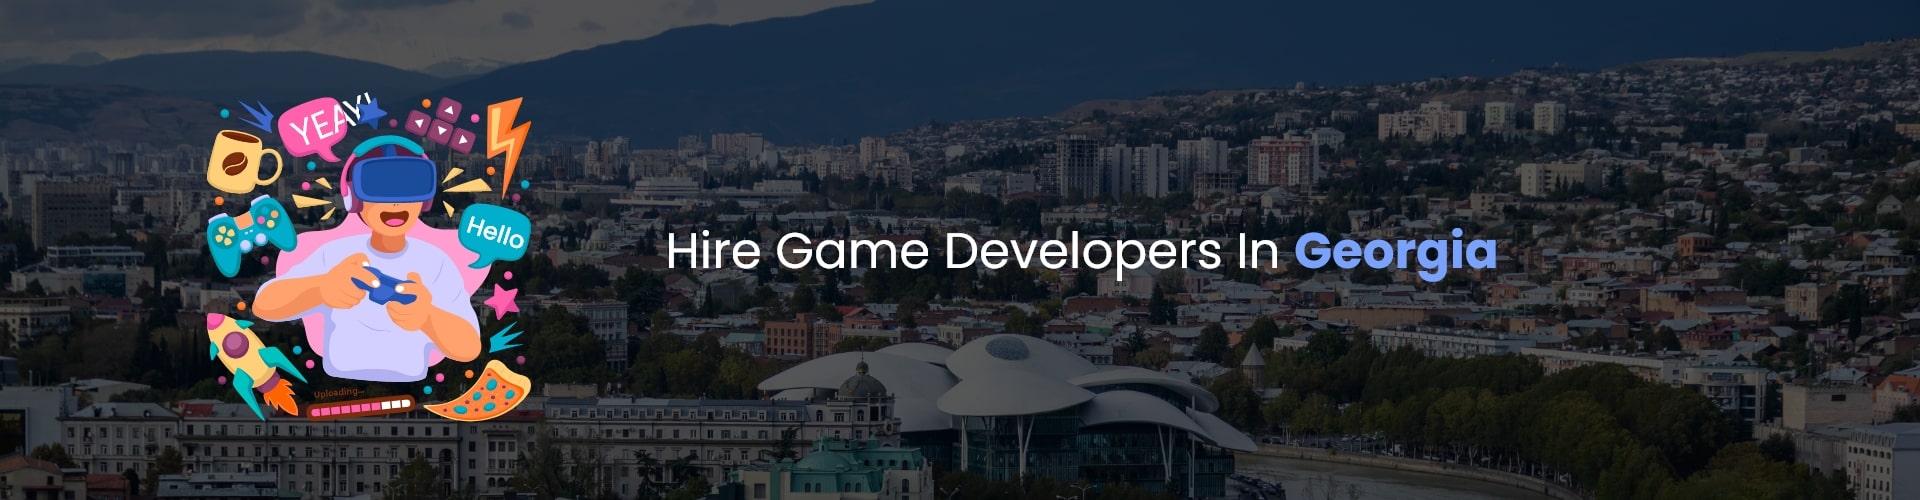 hire game developers in georgia